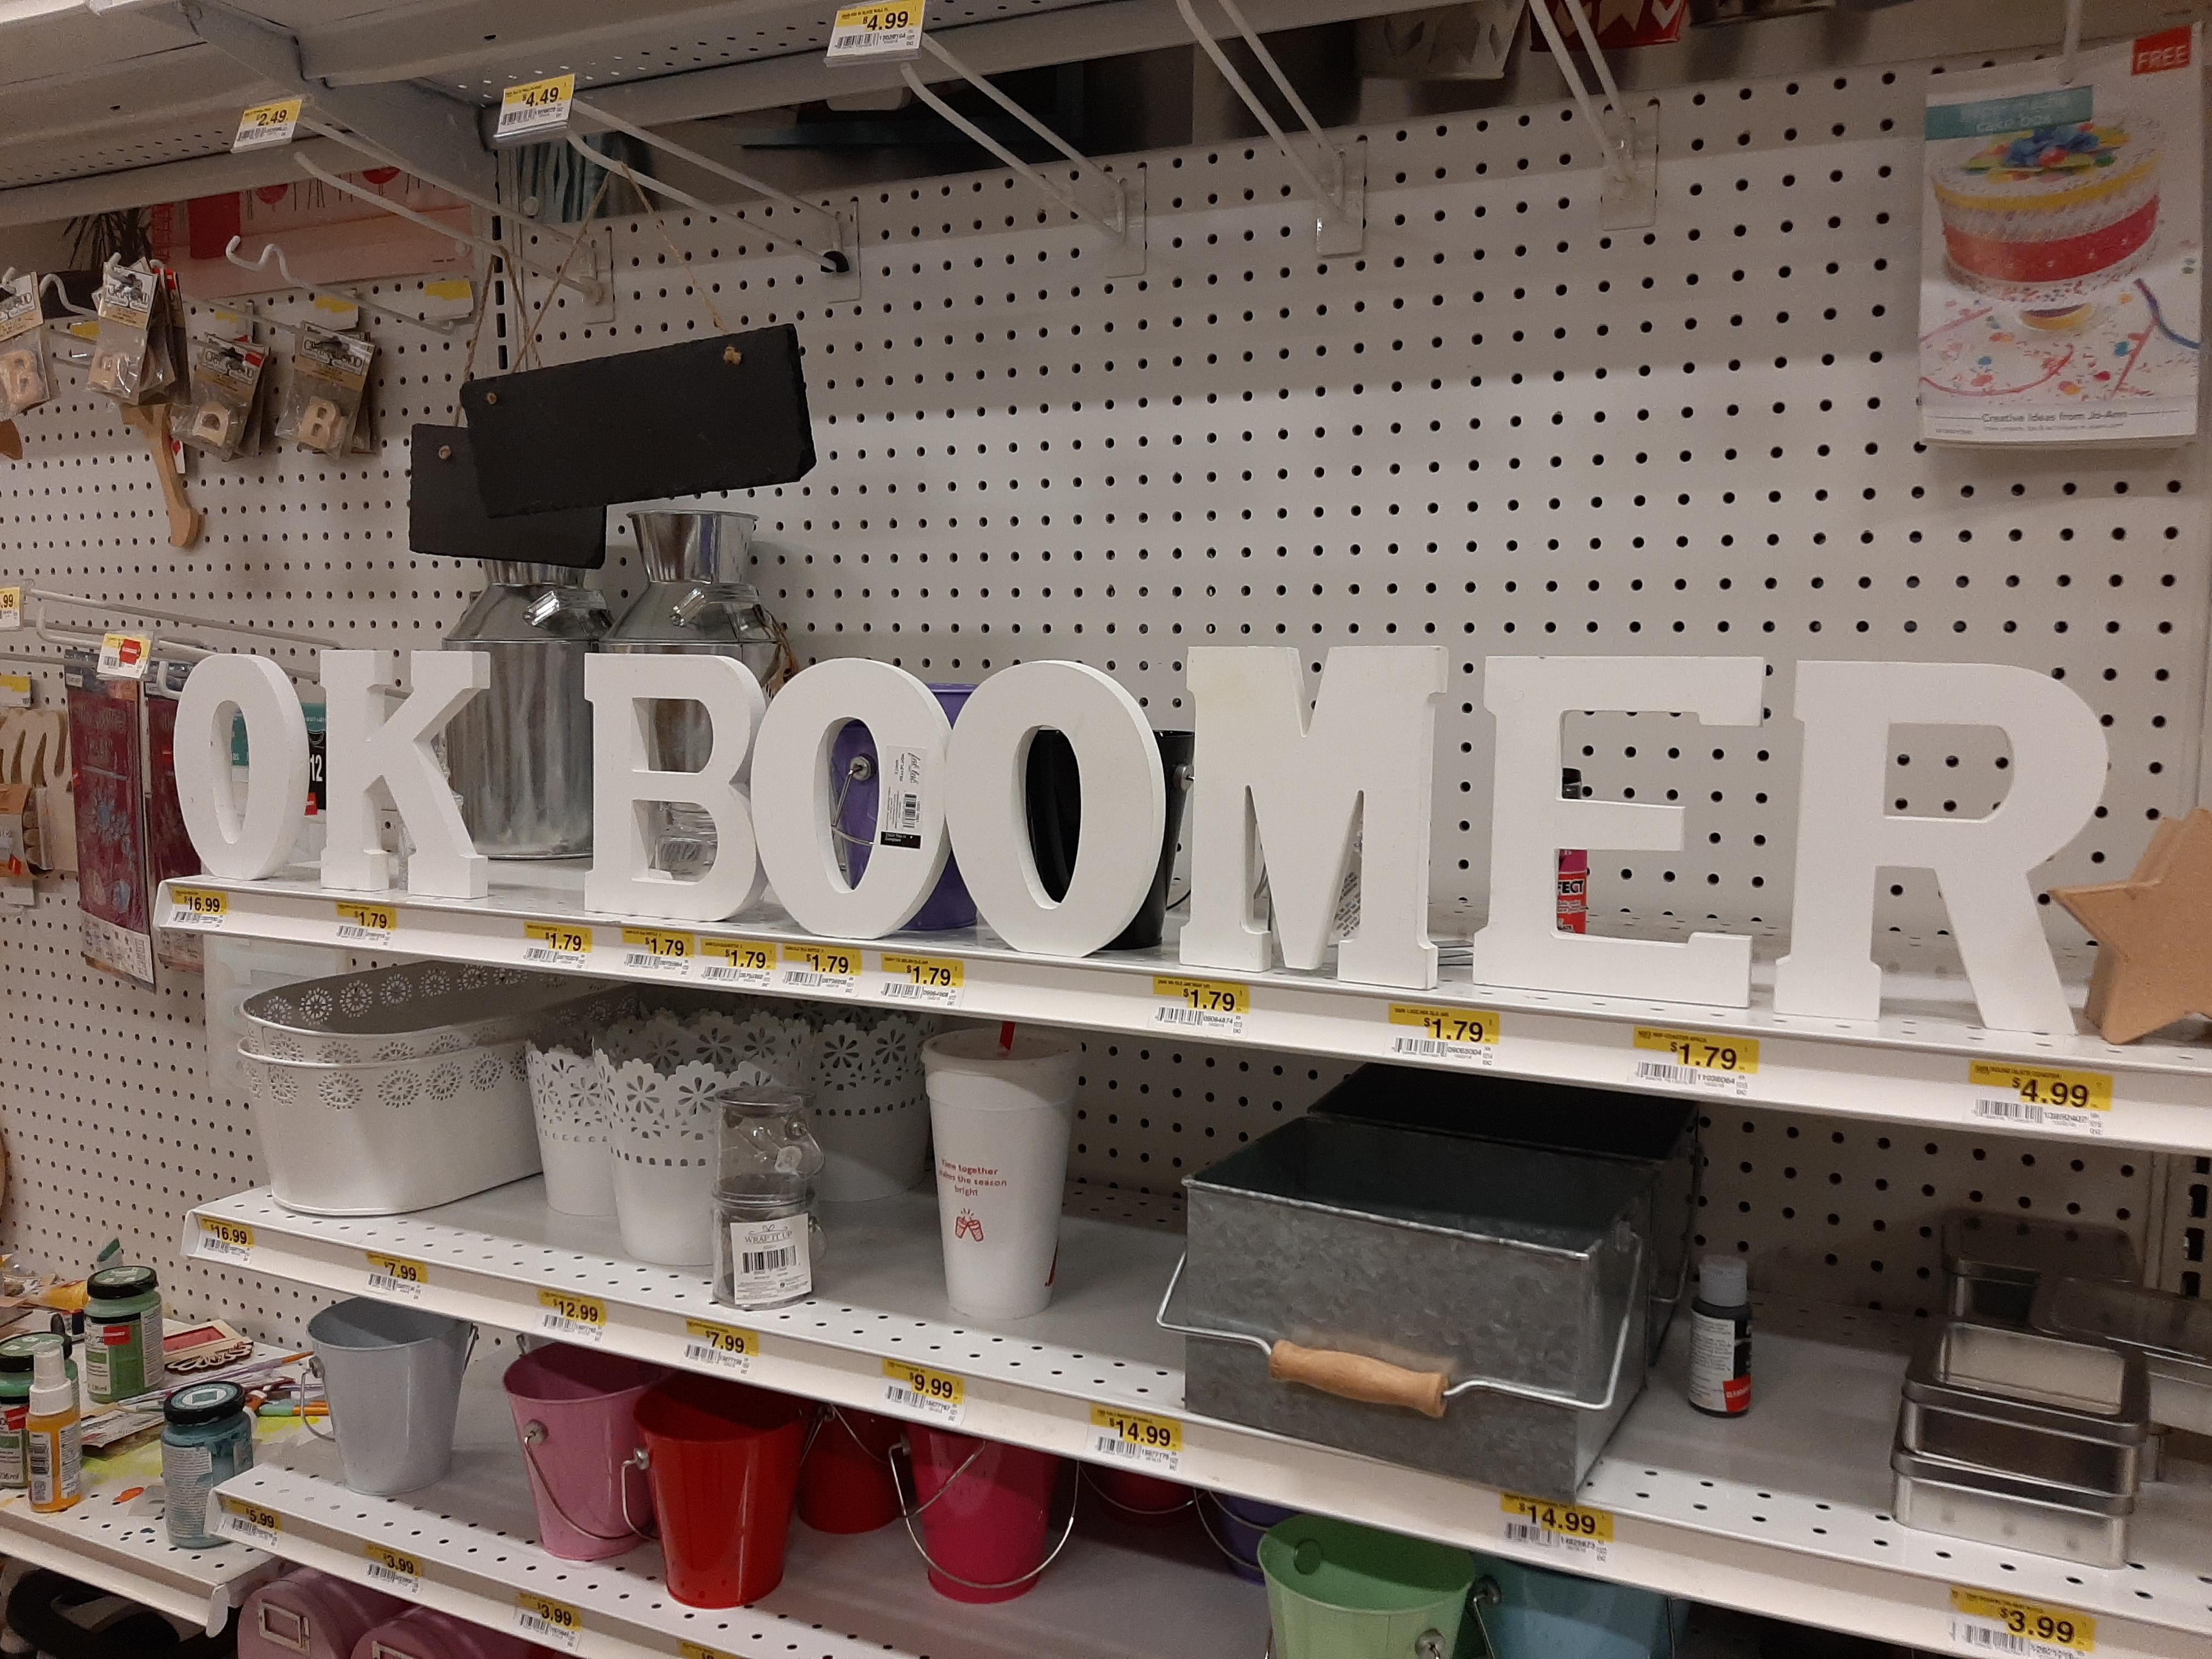 Seen at Joann today